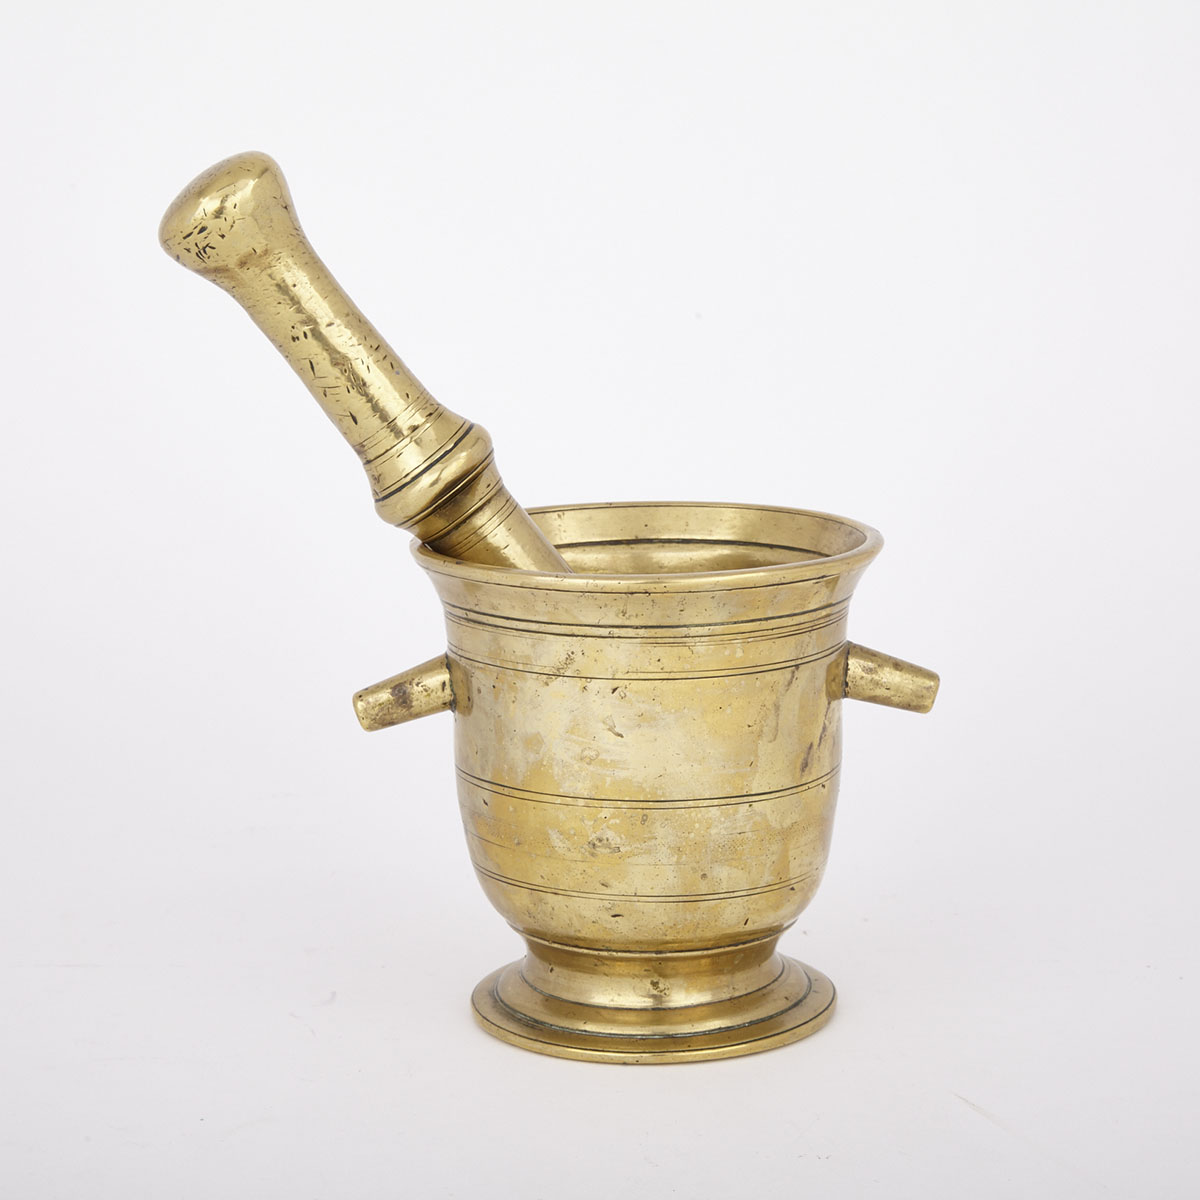 Ring Turned Brass Mortar and Pestle, 19th century or earlier